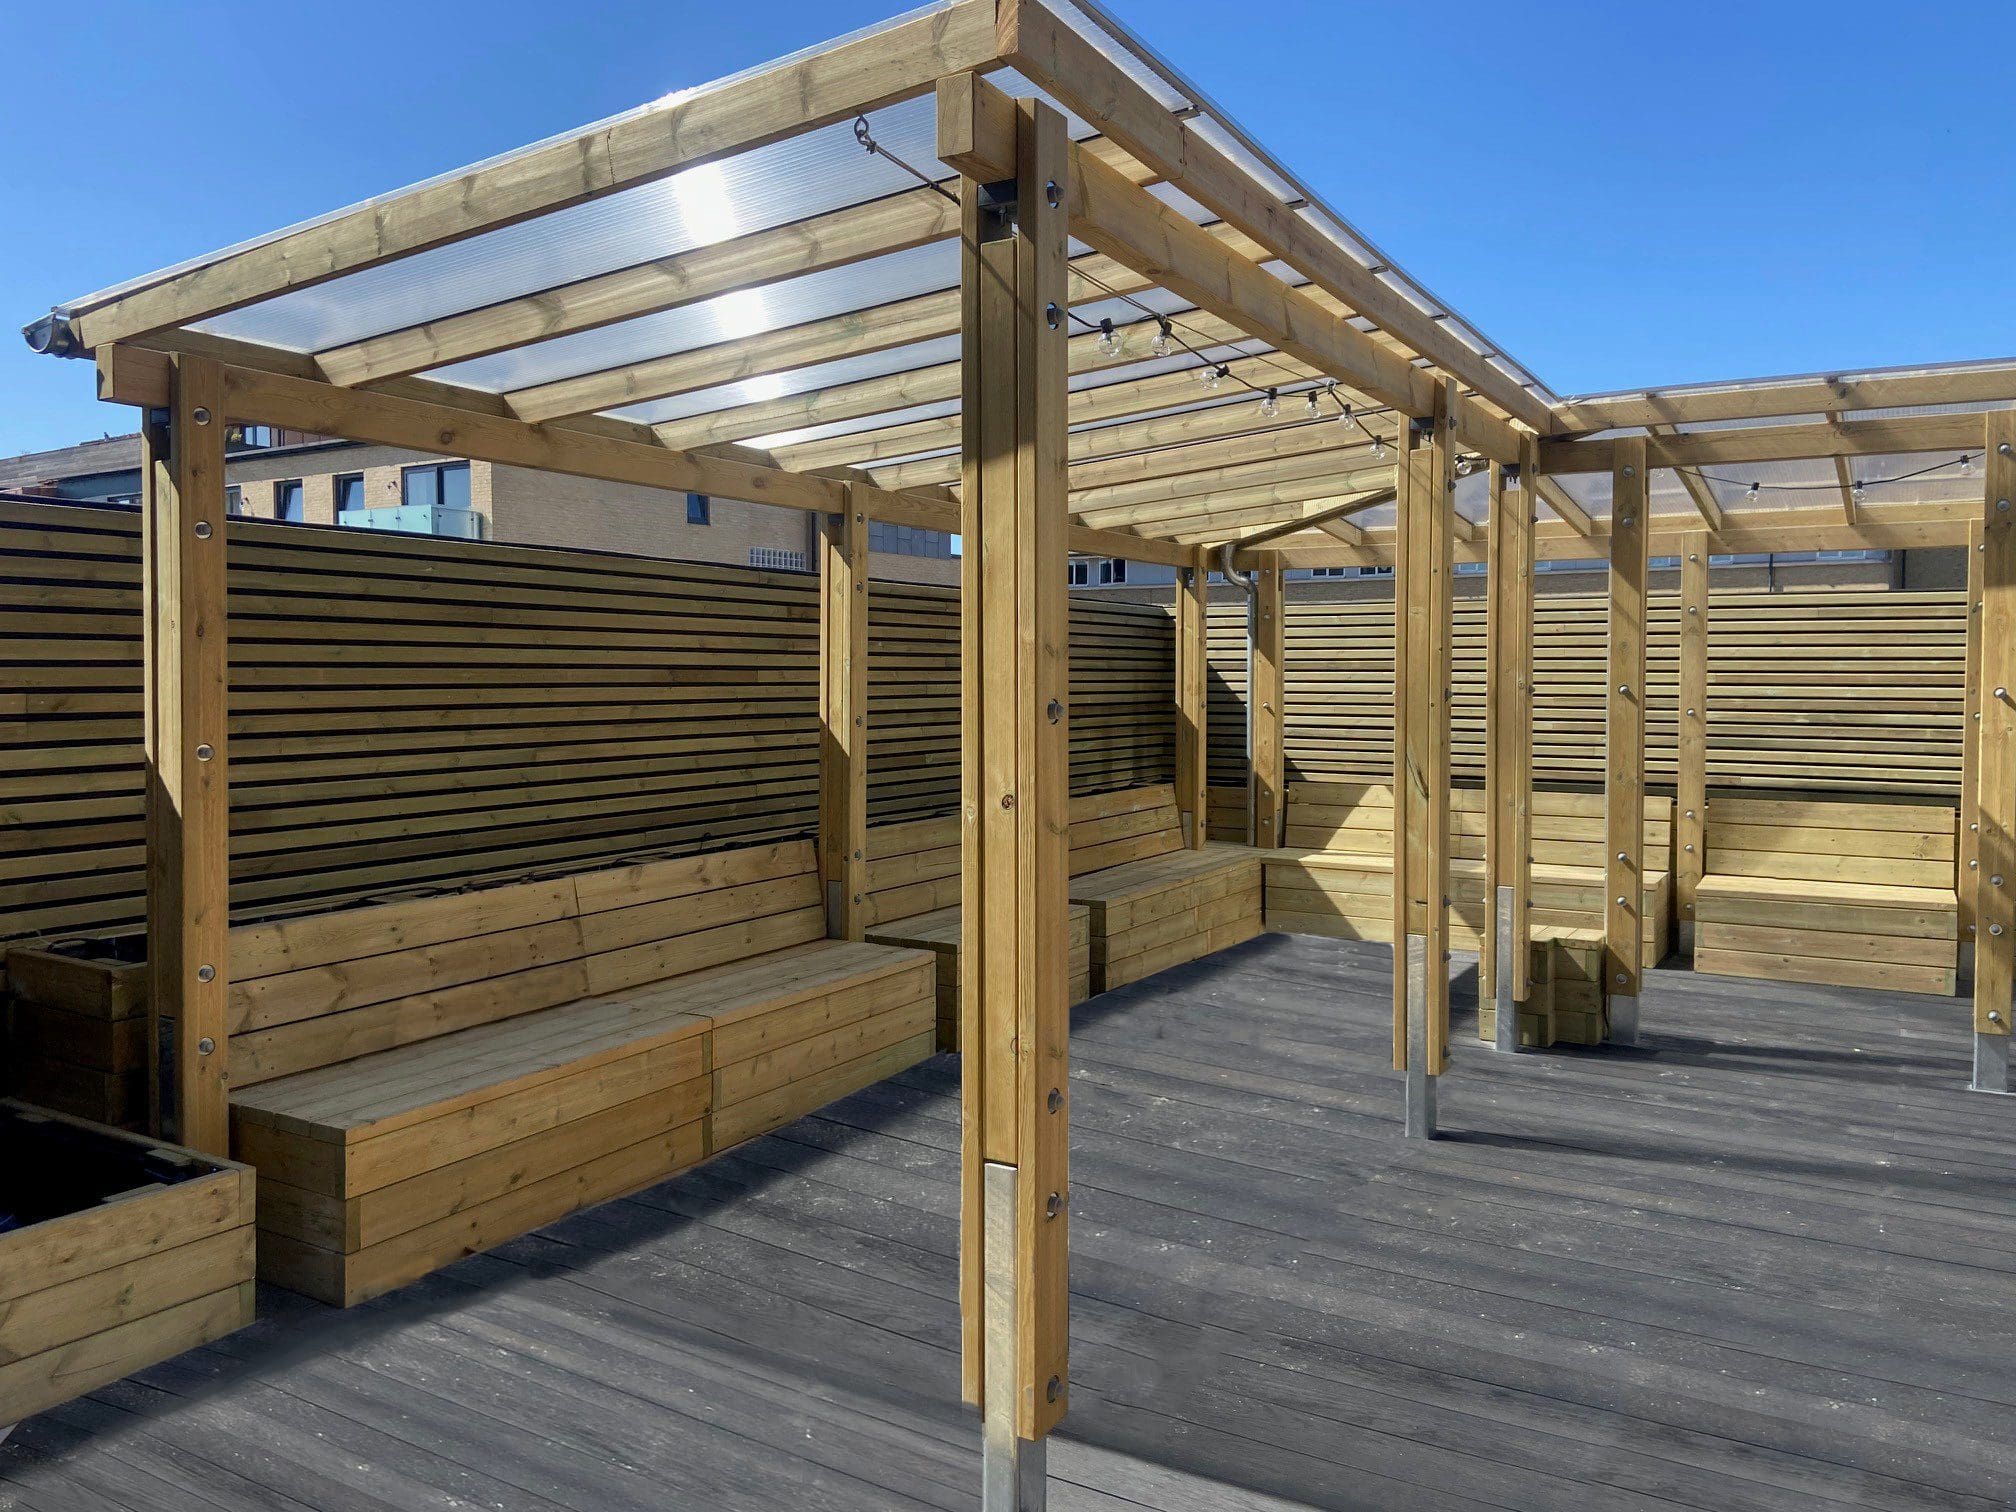 bespoke wooden pergolas with built in benches attached to raised planters